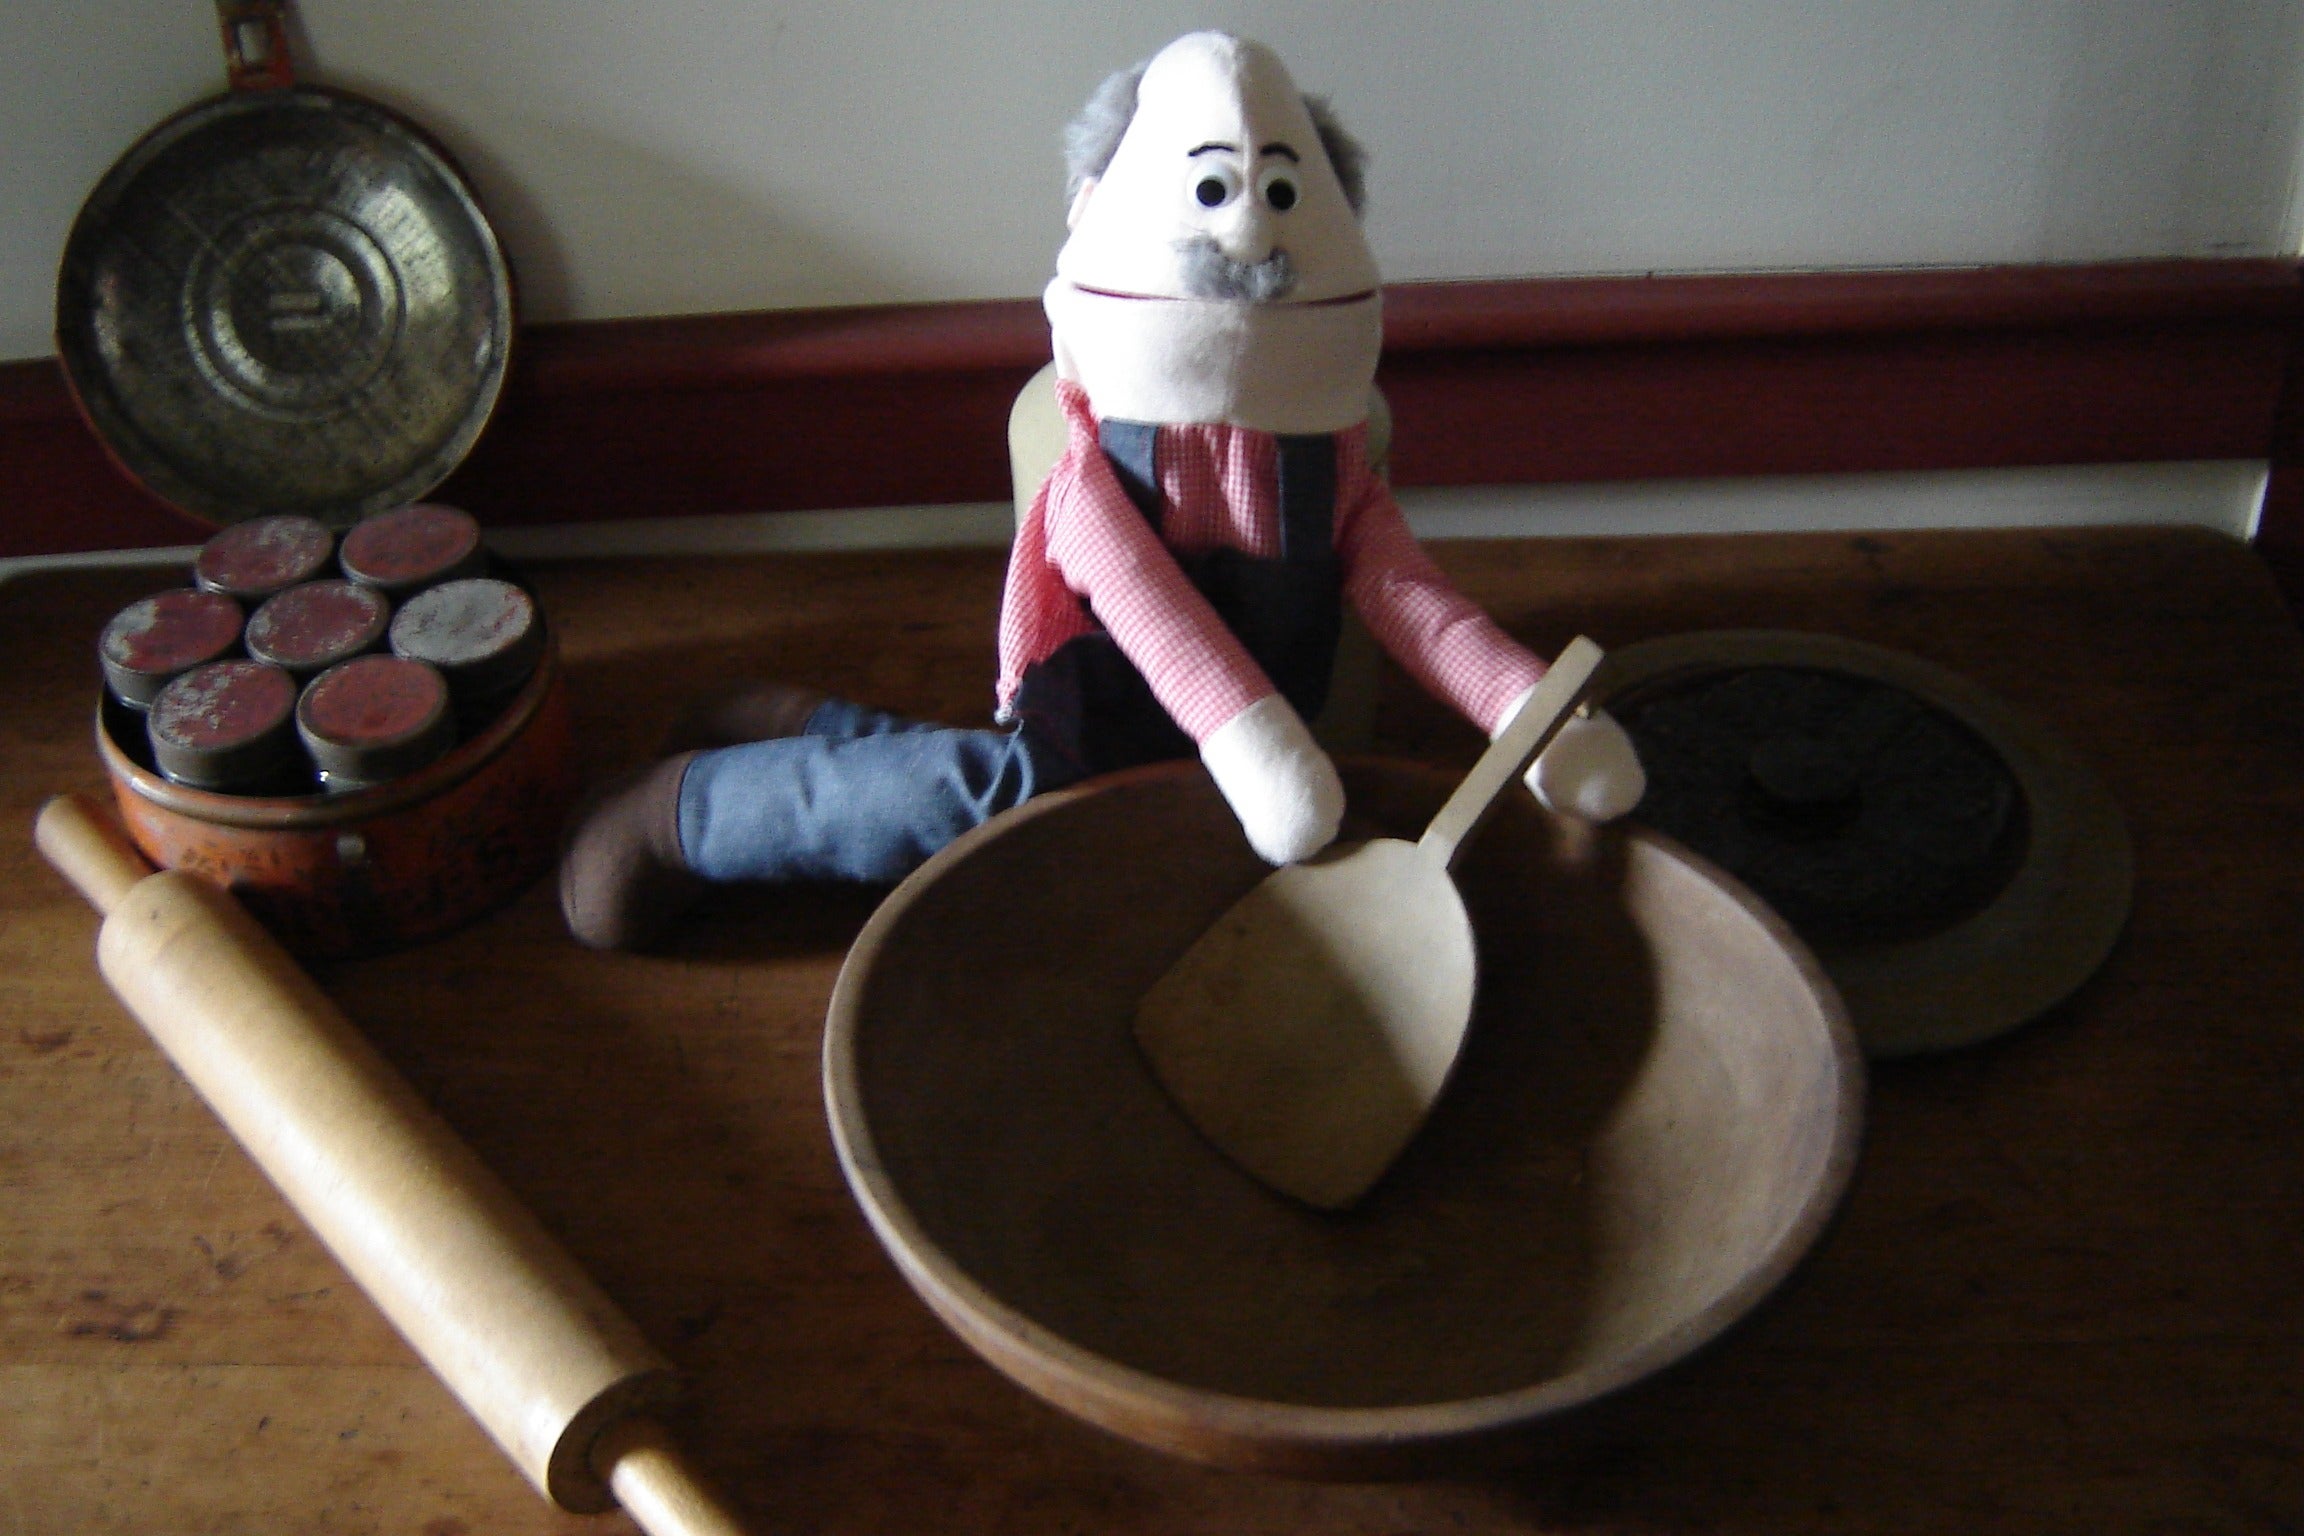 A hand puppet, featuring overalls and a mustache, sits on a table holding a spoon in a wooden bowl